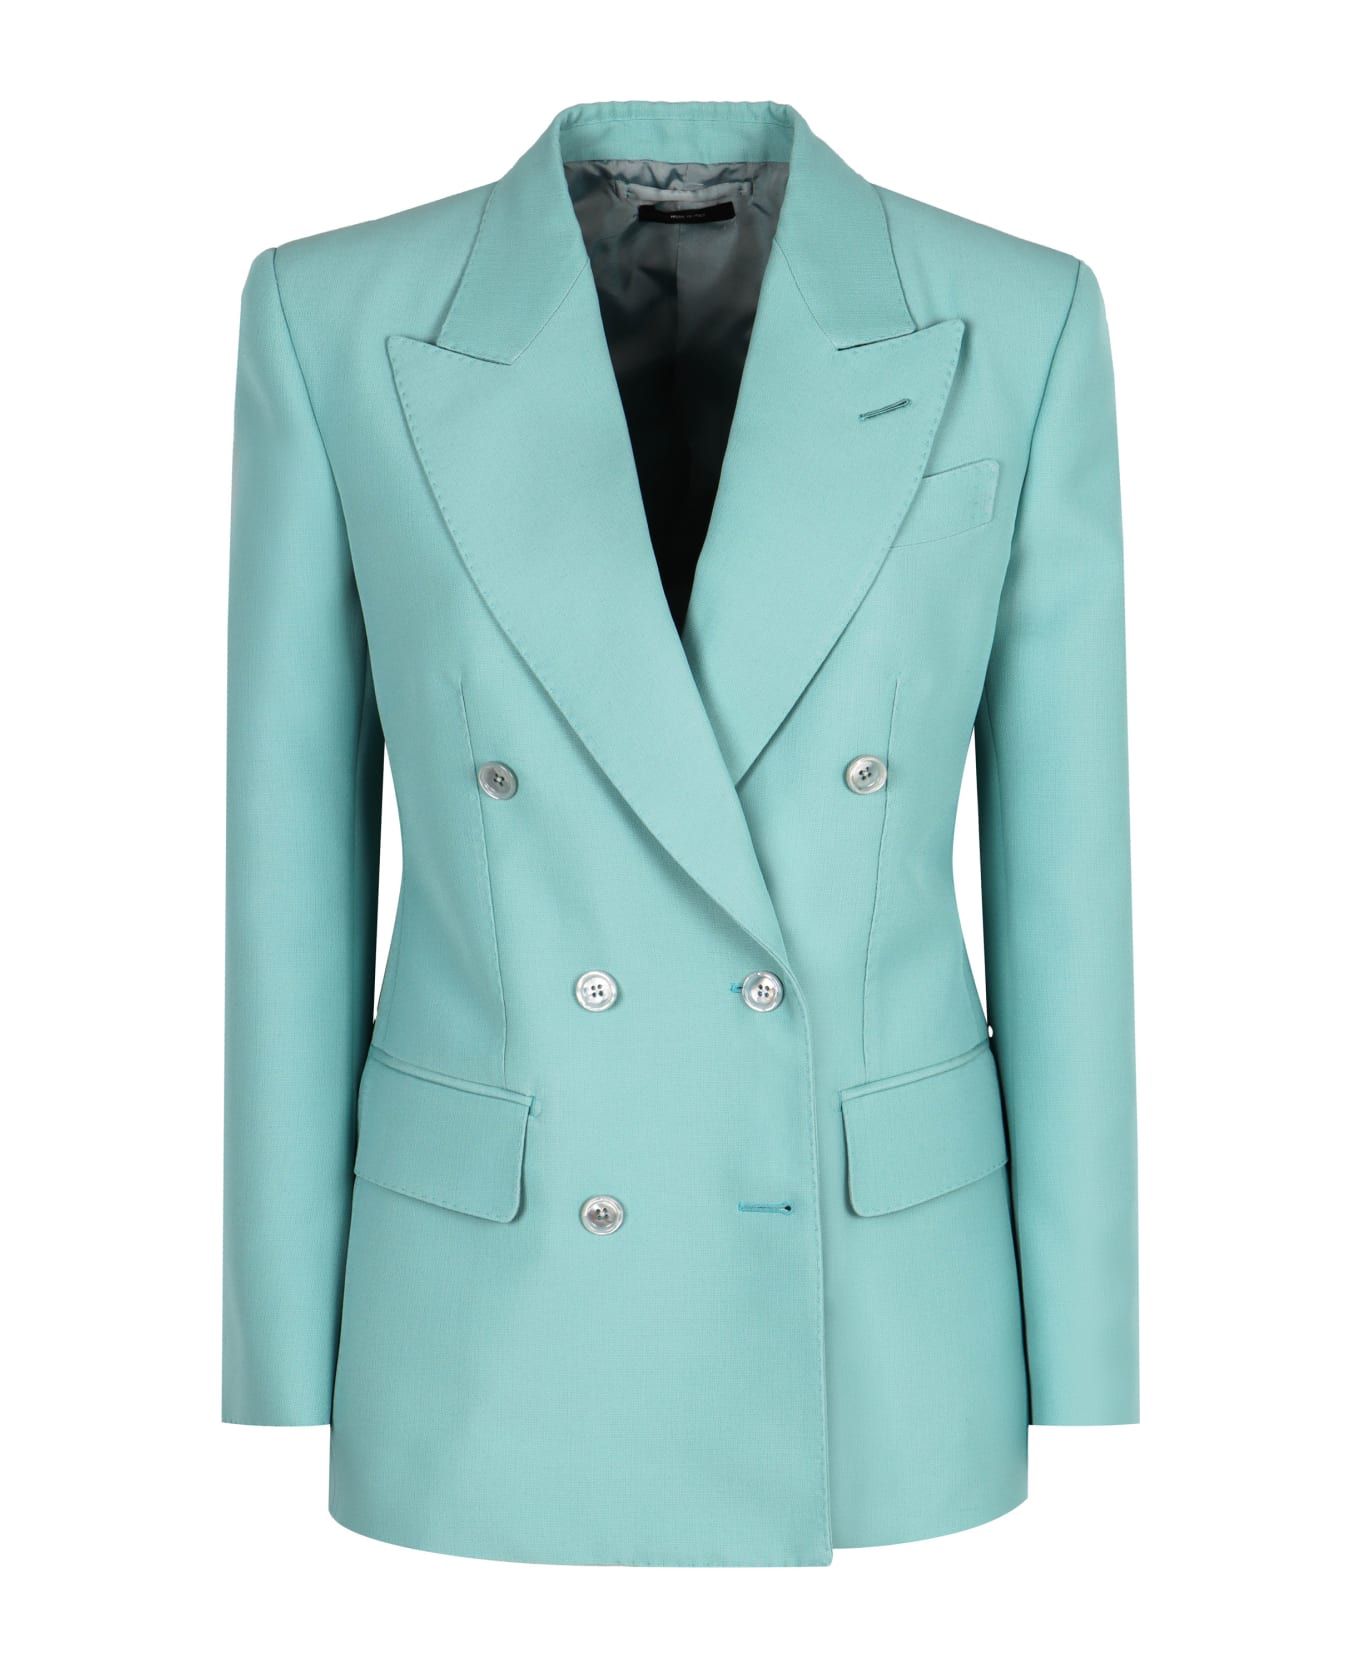 Tom Ford Double-breasted Wool Blazer - Light Blue ブレザー